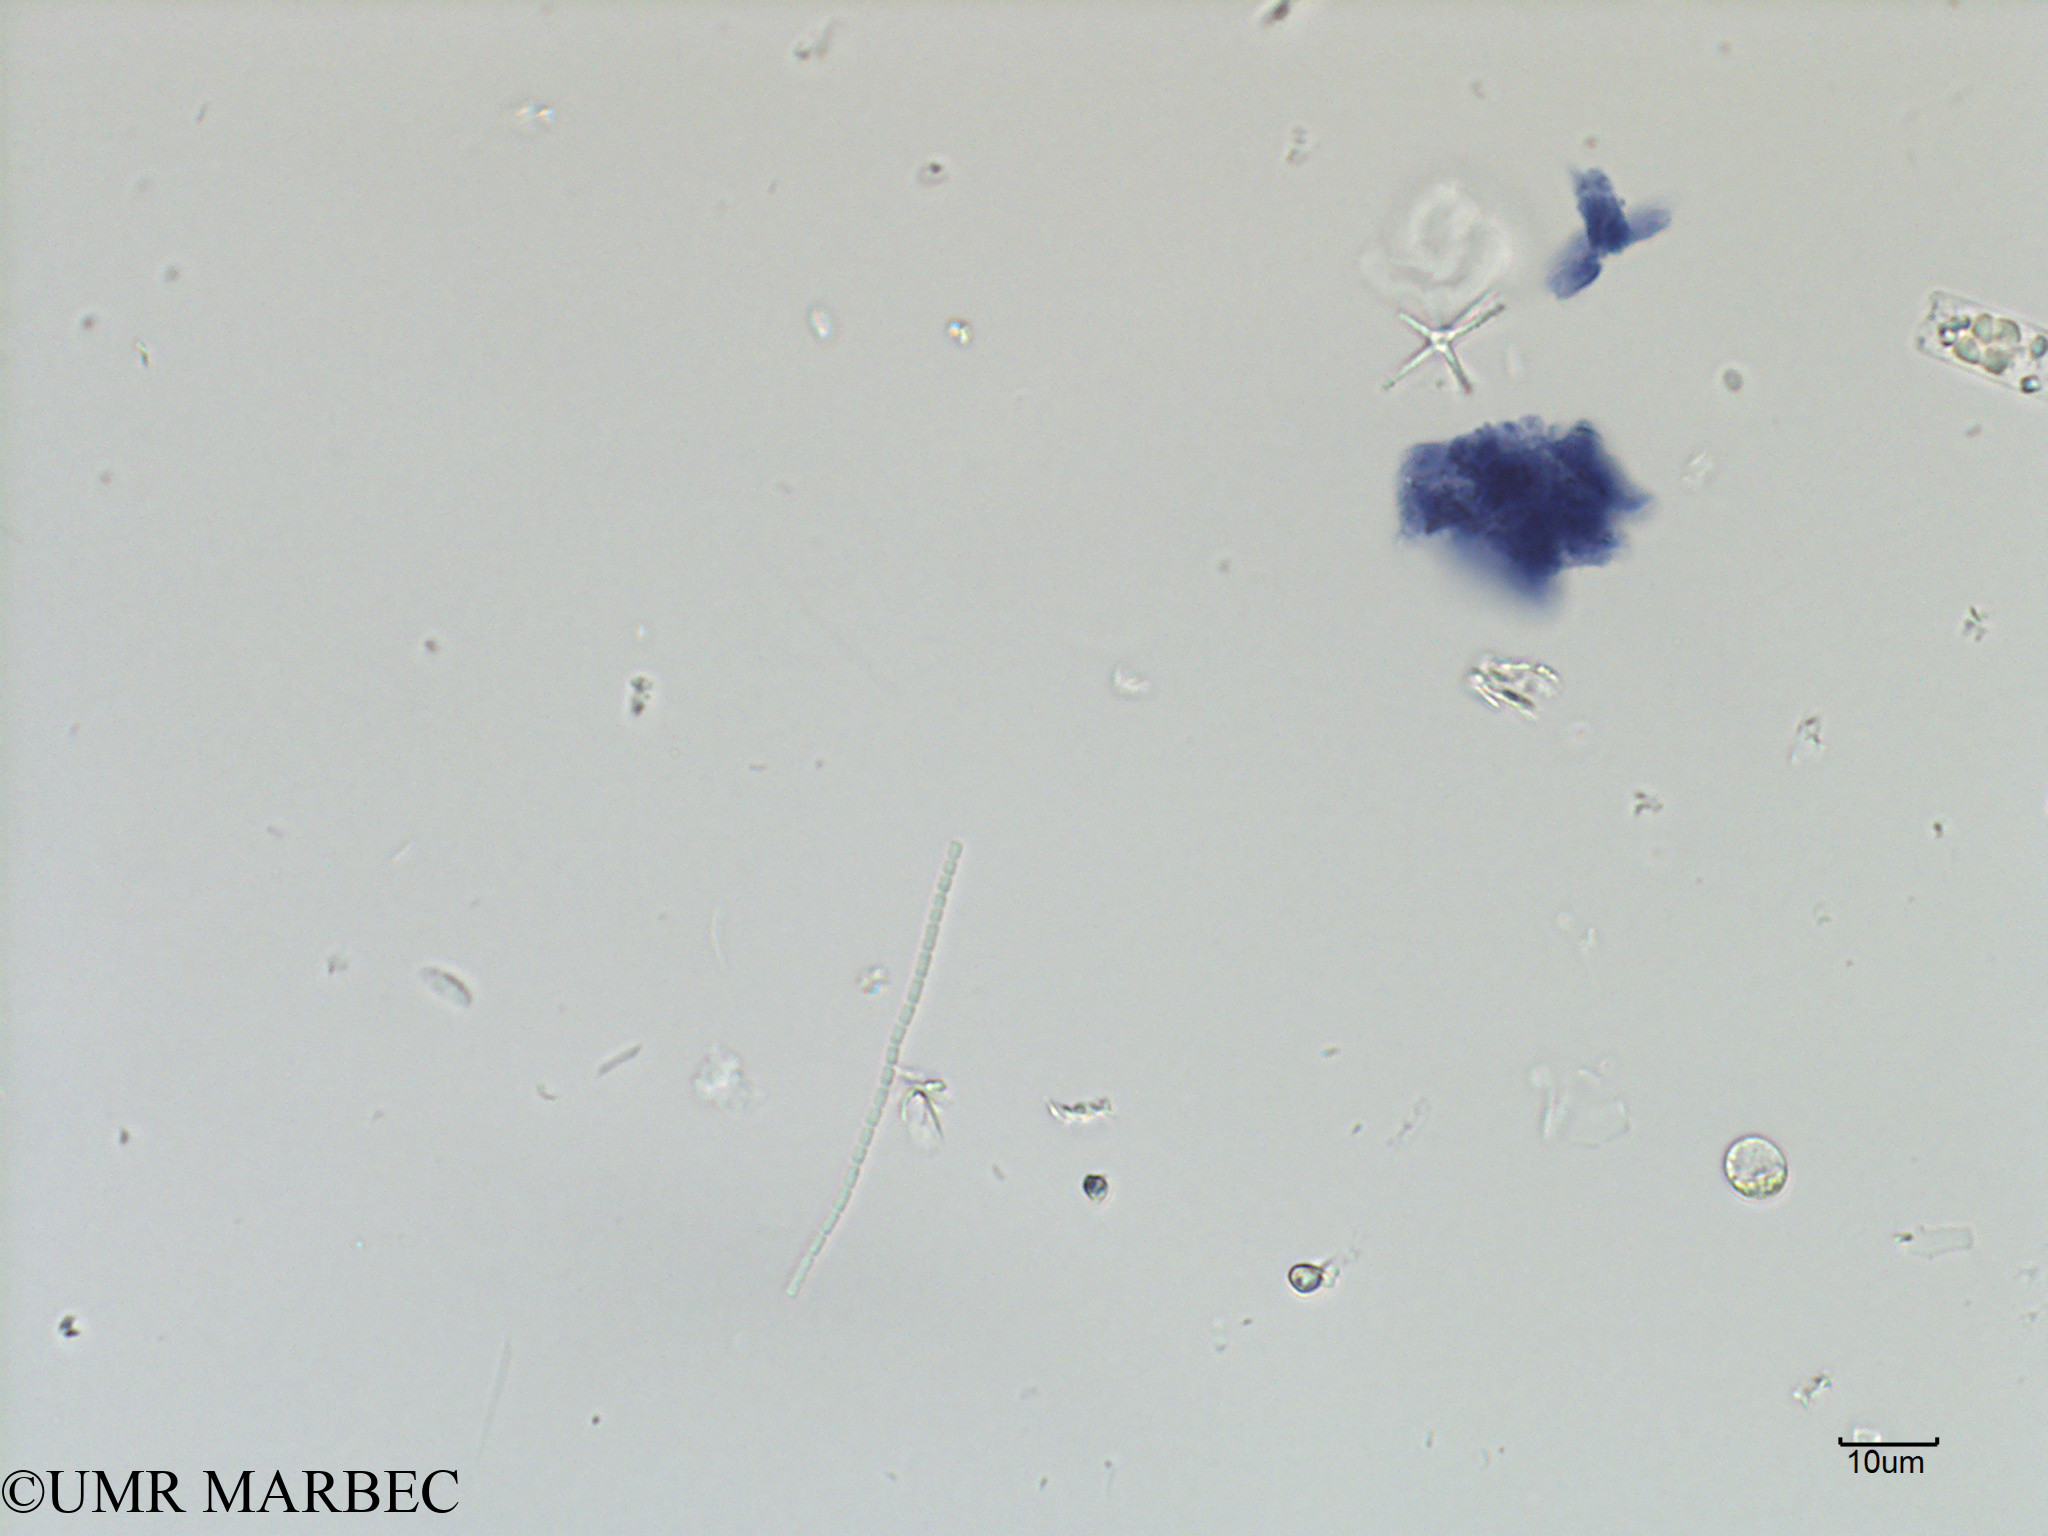 phyto/Scattered_Islands/iles_glorieuses/SIREME May 2016/Pseudanabaena sp5 (ancien Oscillatoriale spp-SIREME-Glorieuses2016-GLO5surf-121016-oscillatoriale sp11-2)(copy).jpg